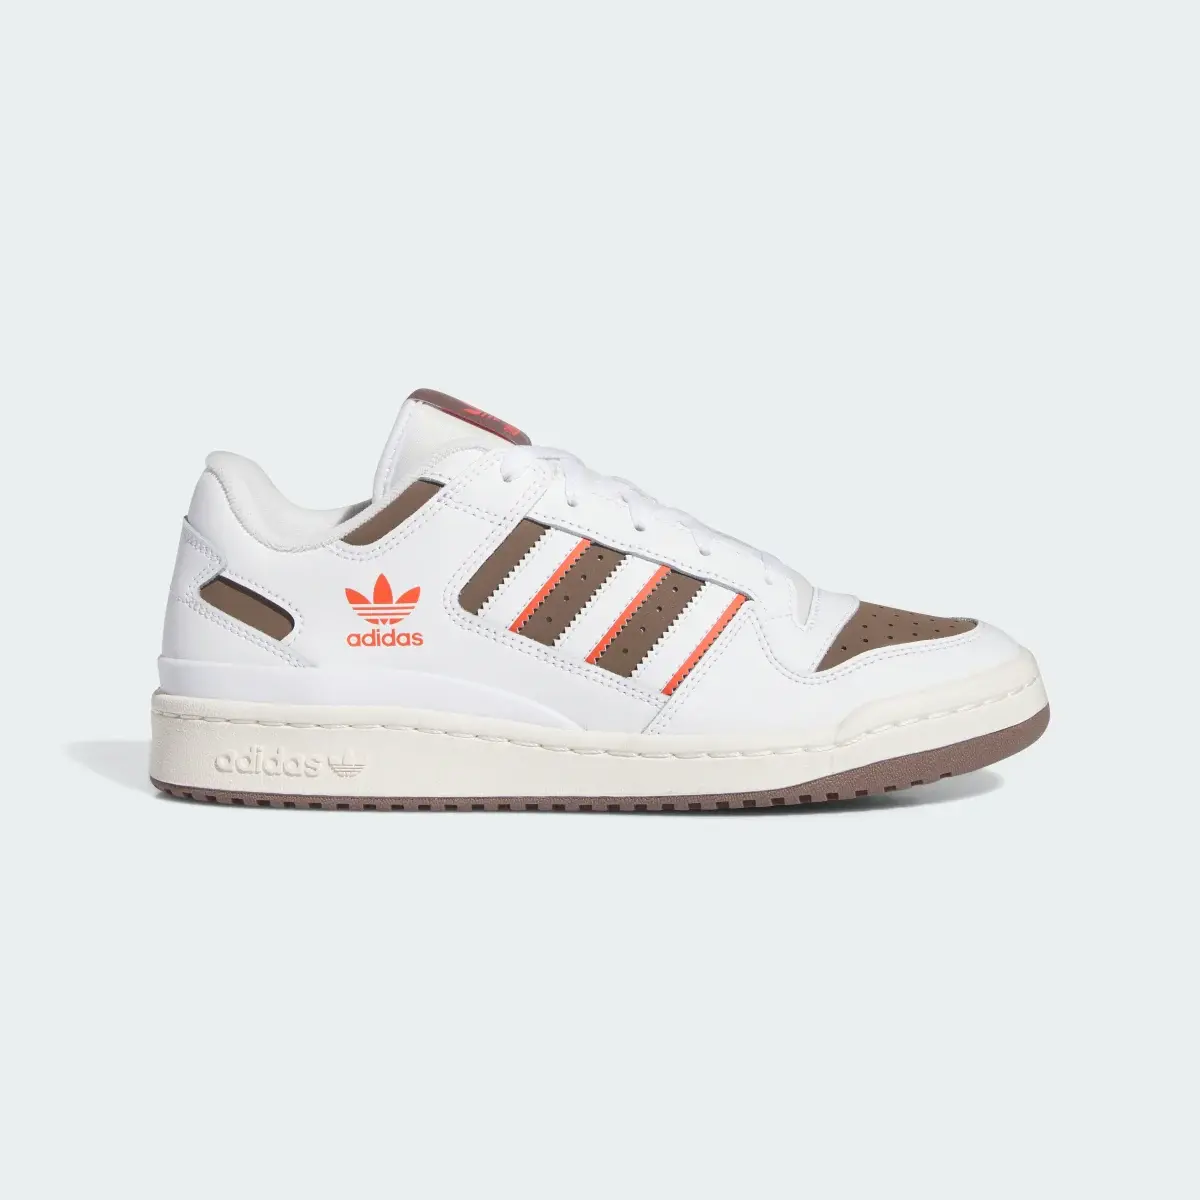 Adidas Forum Low CL Basketball Shoes. 2